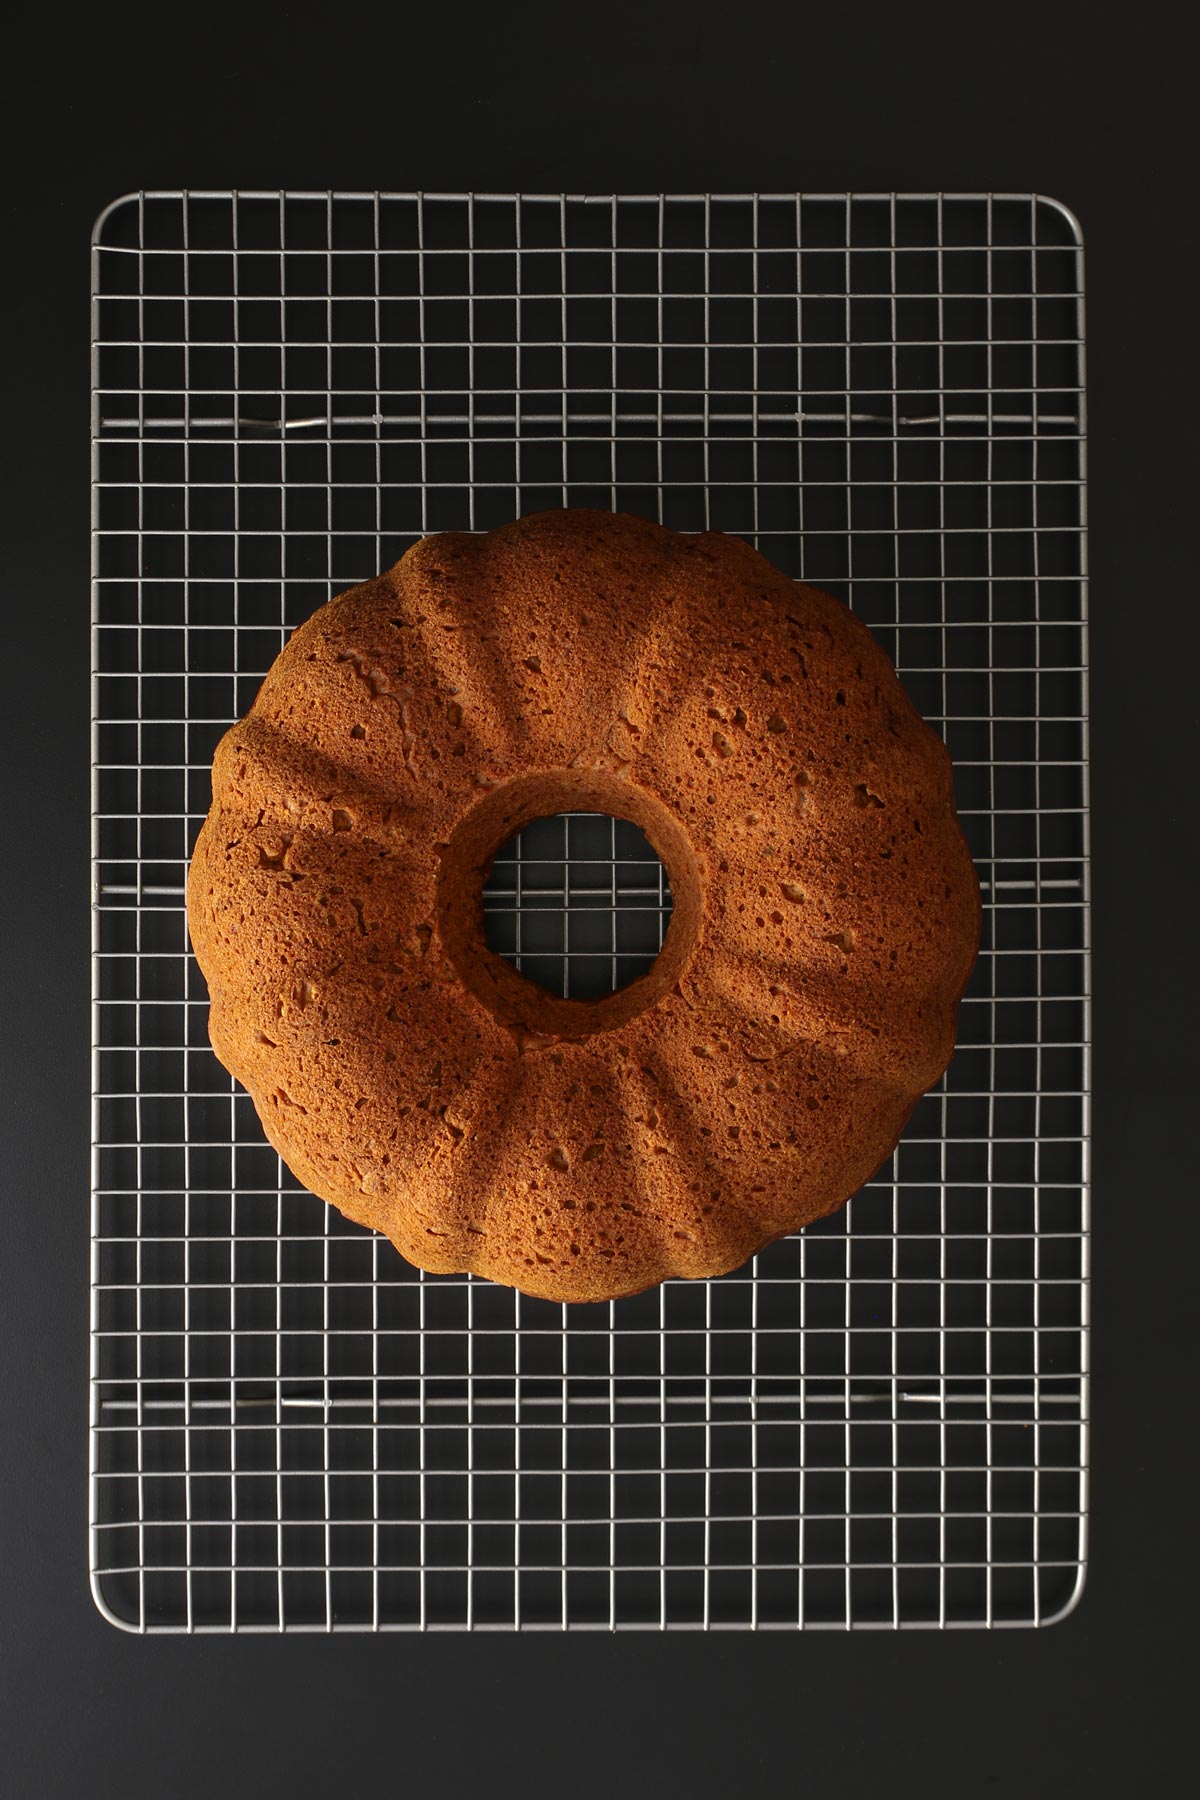 bundt cake cooling on wire rack on a black table top.